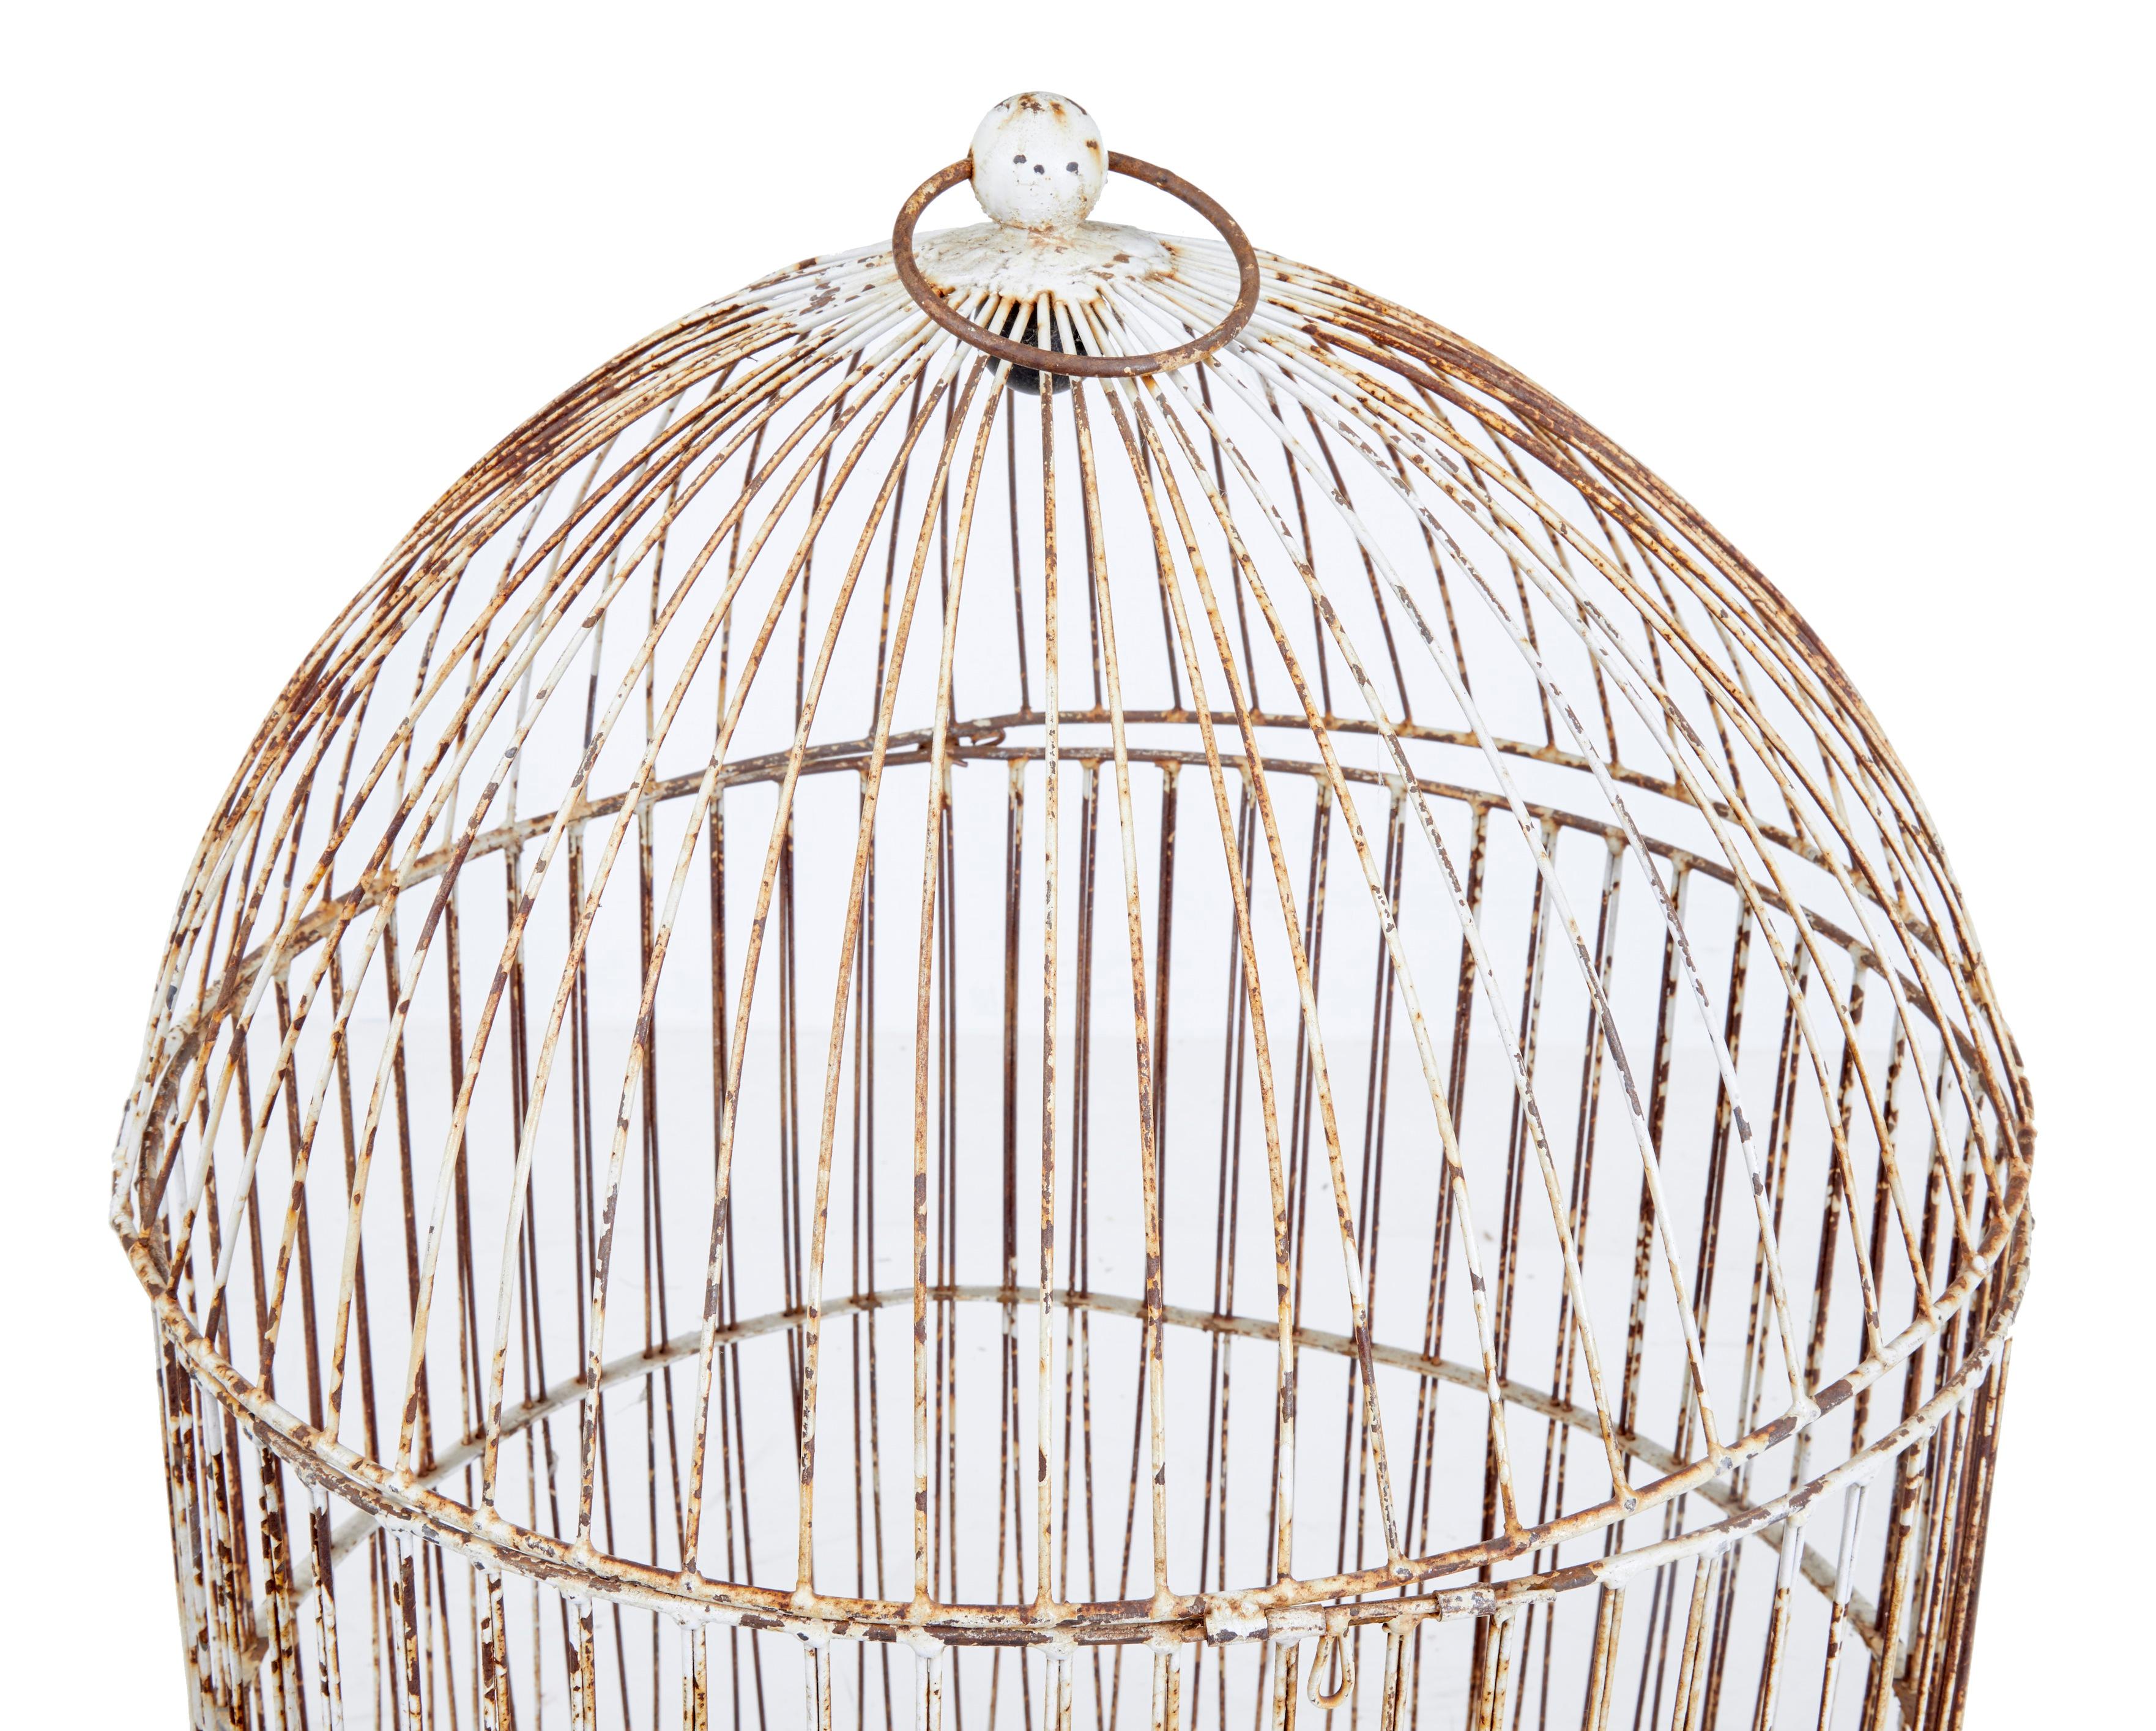 19th century large wire frame decorative bird cage, circa 1890.

Large wire frame parrots cage.

2 parts, with removable dome top with bull ring fitment. No fittings included. Ideal decorative piece. Will need some work to get the dome top to